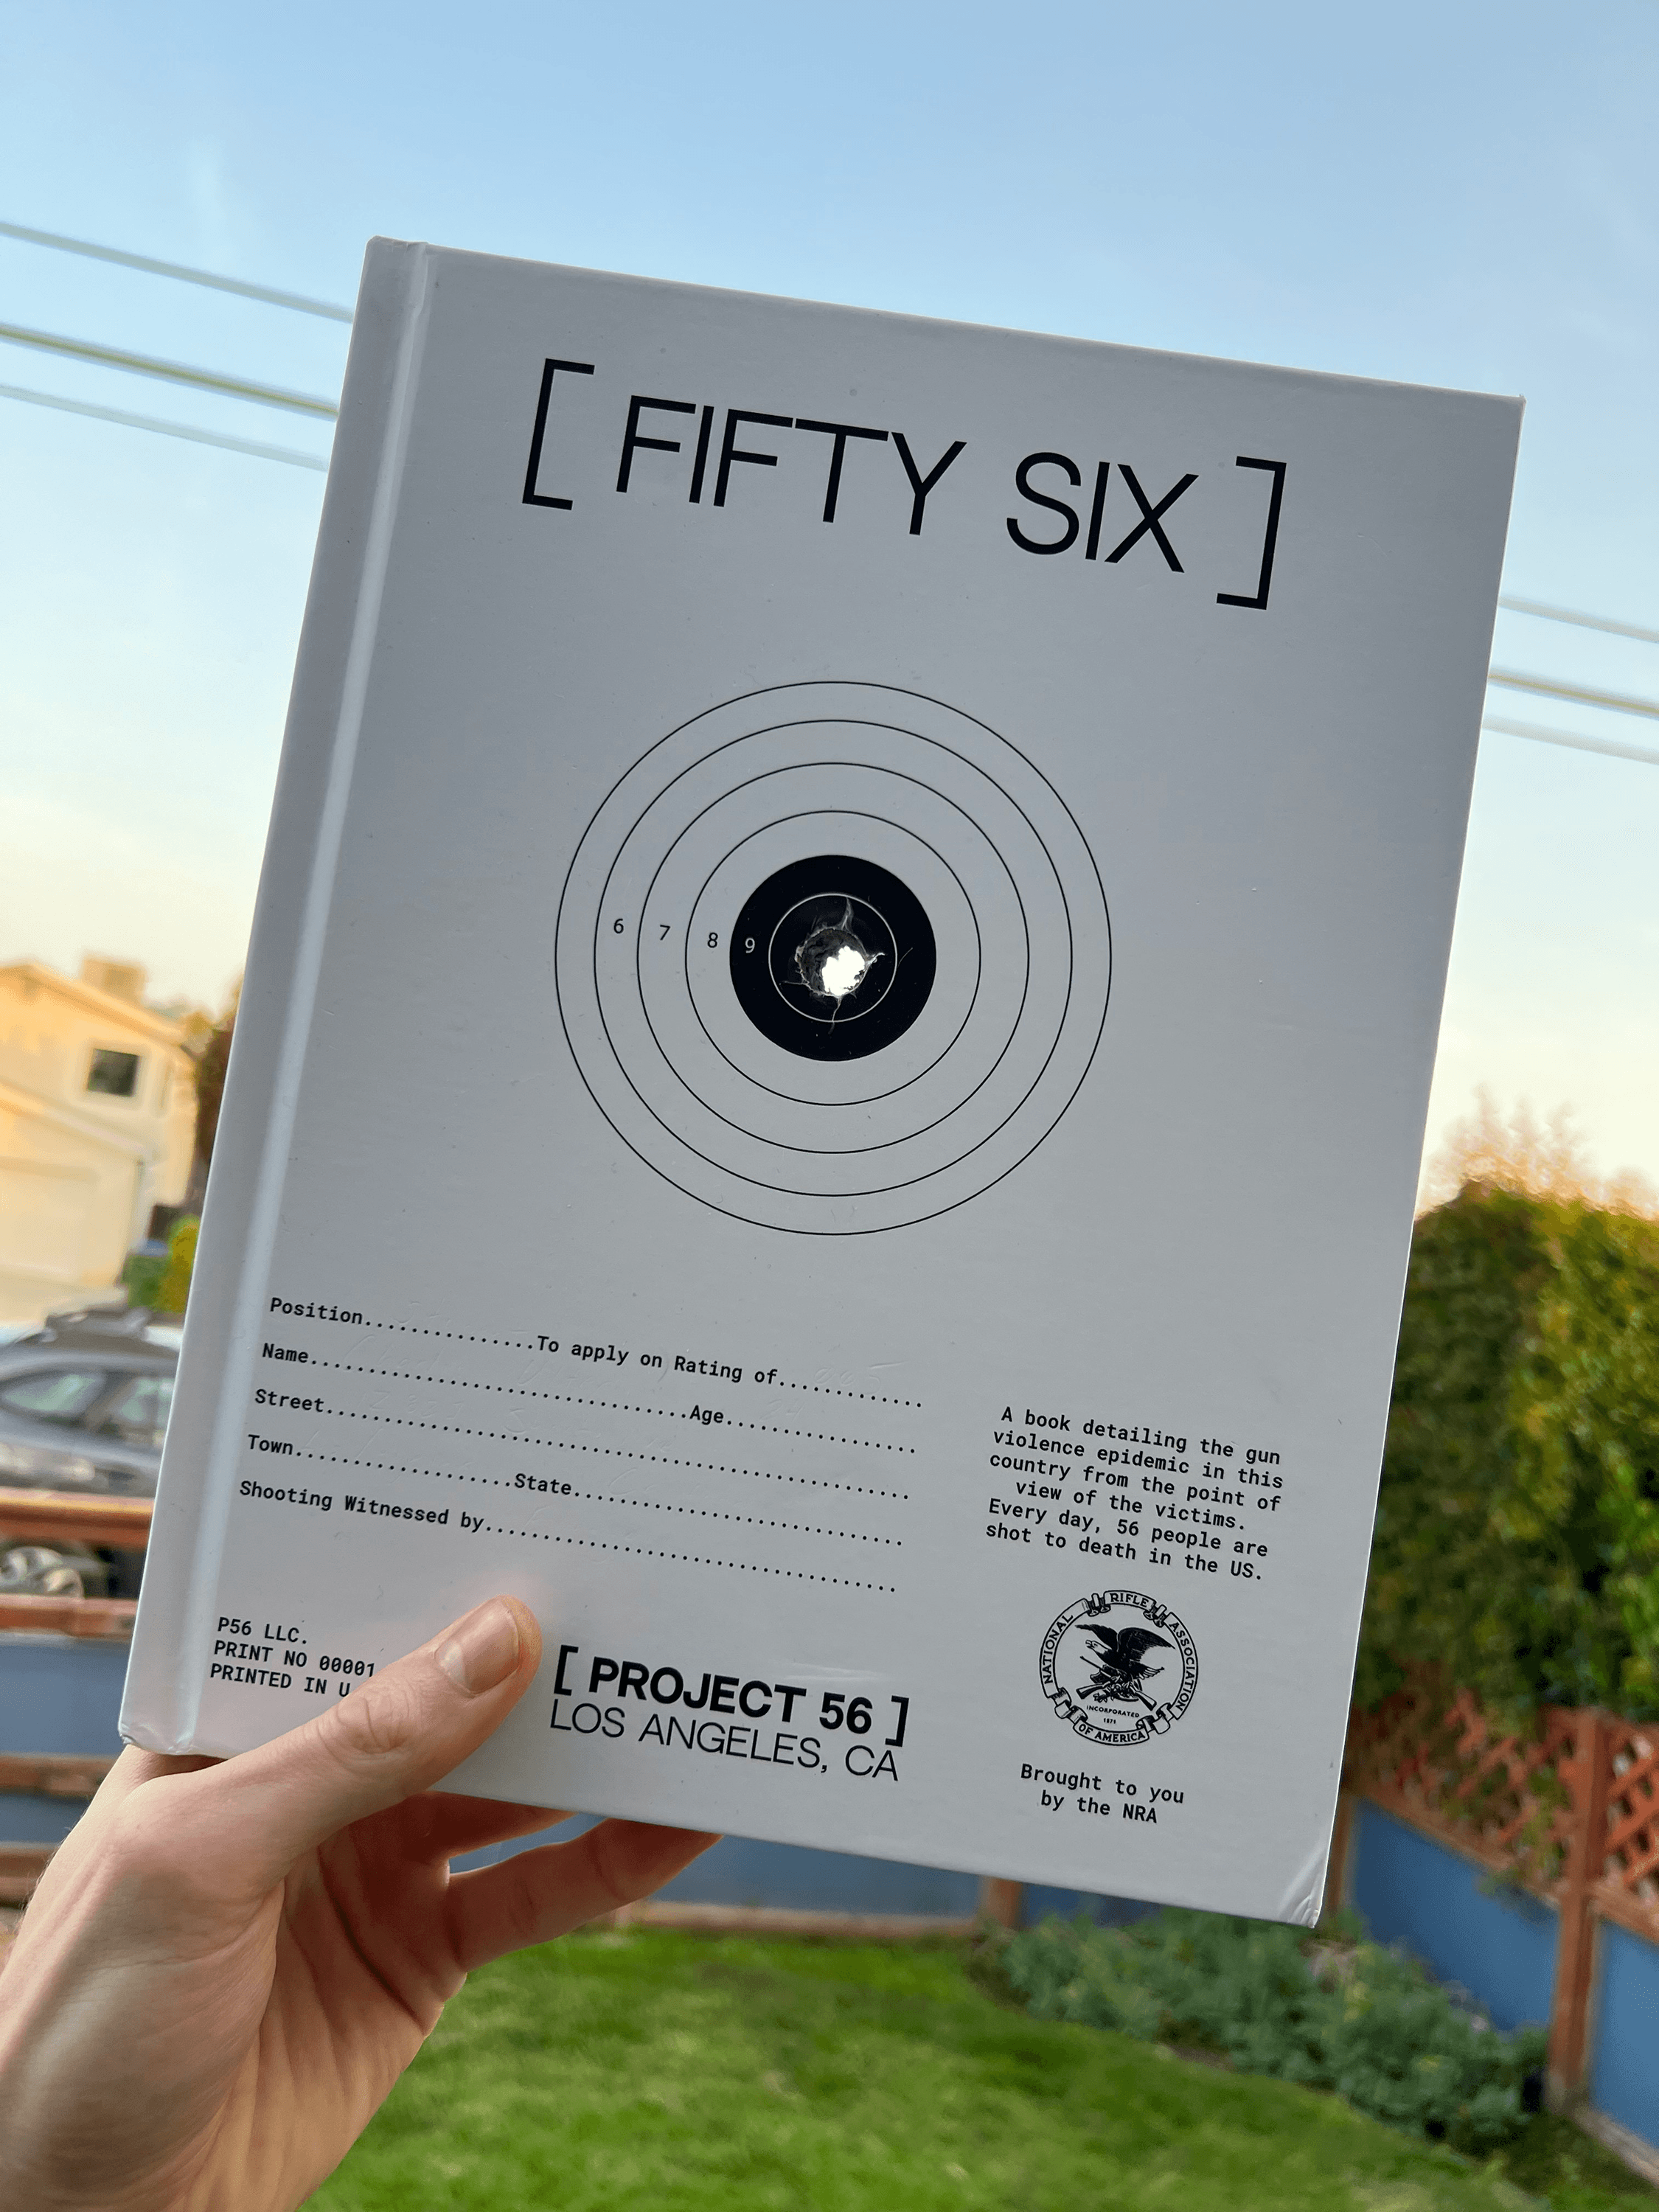 [ Project 56 ] is a book detailing the gun violence epidemic through 911 transcripts